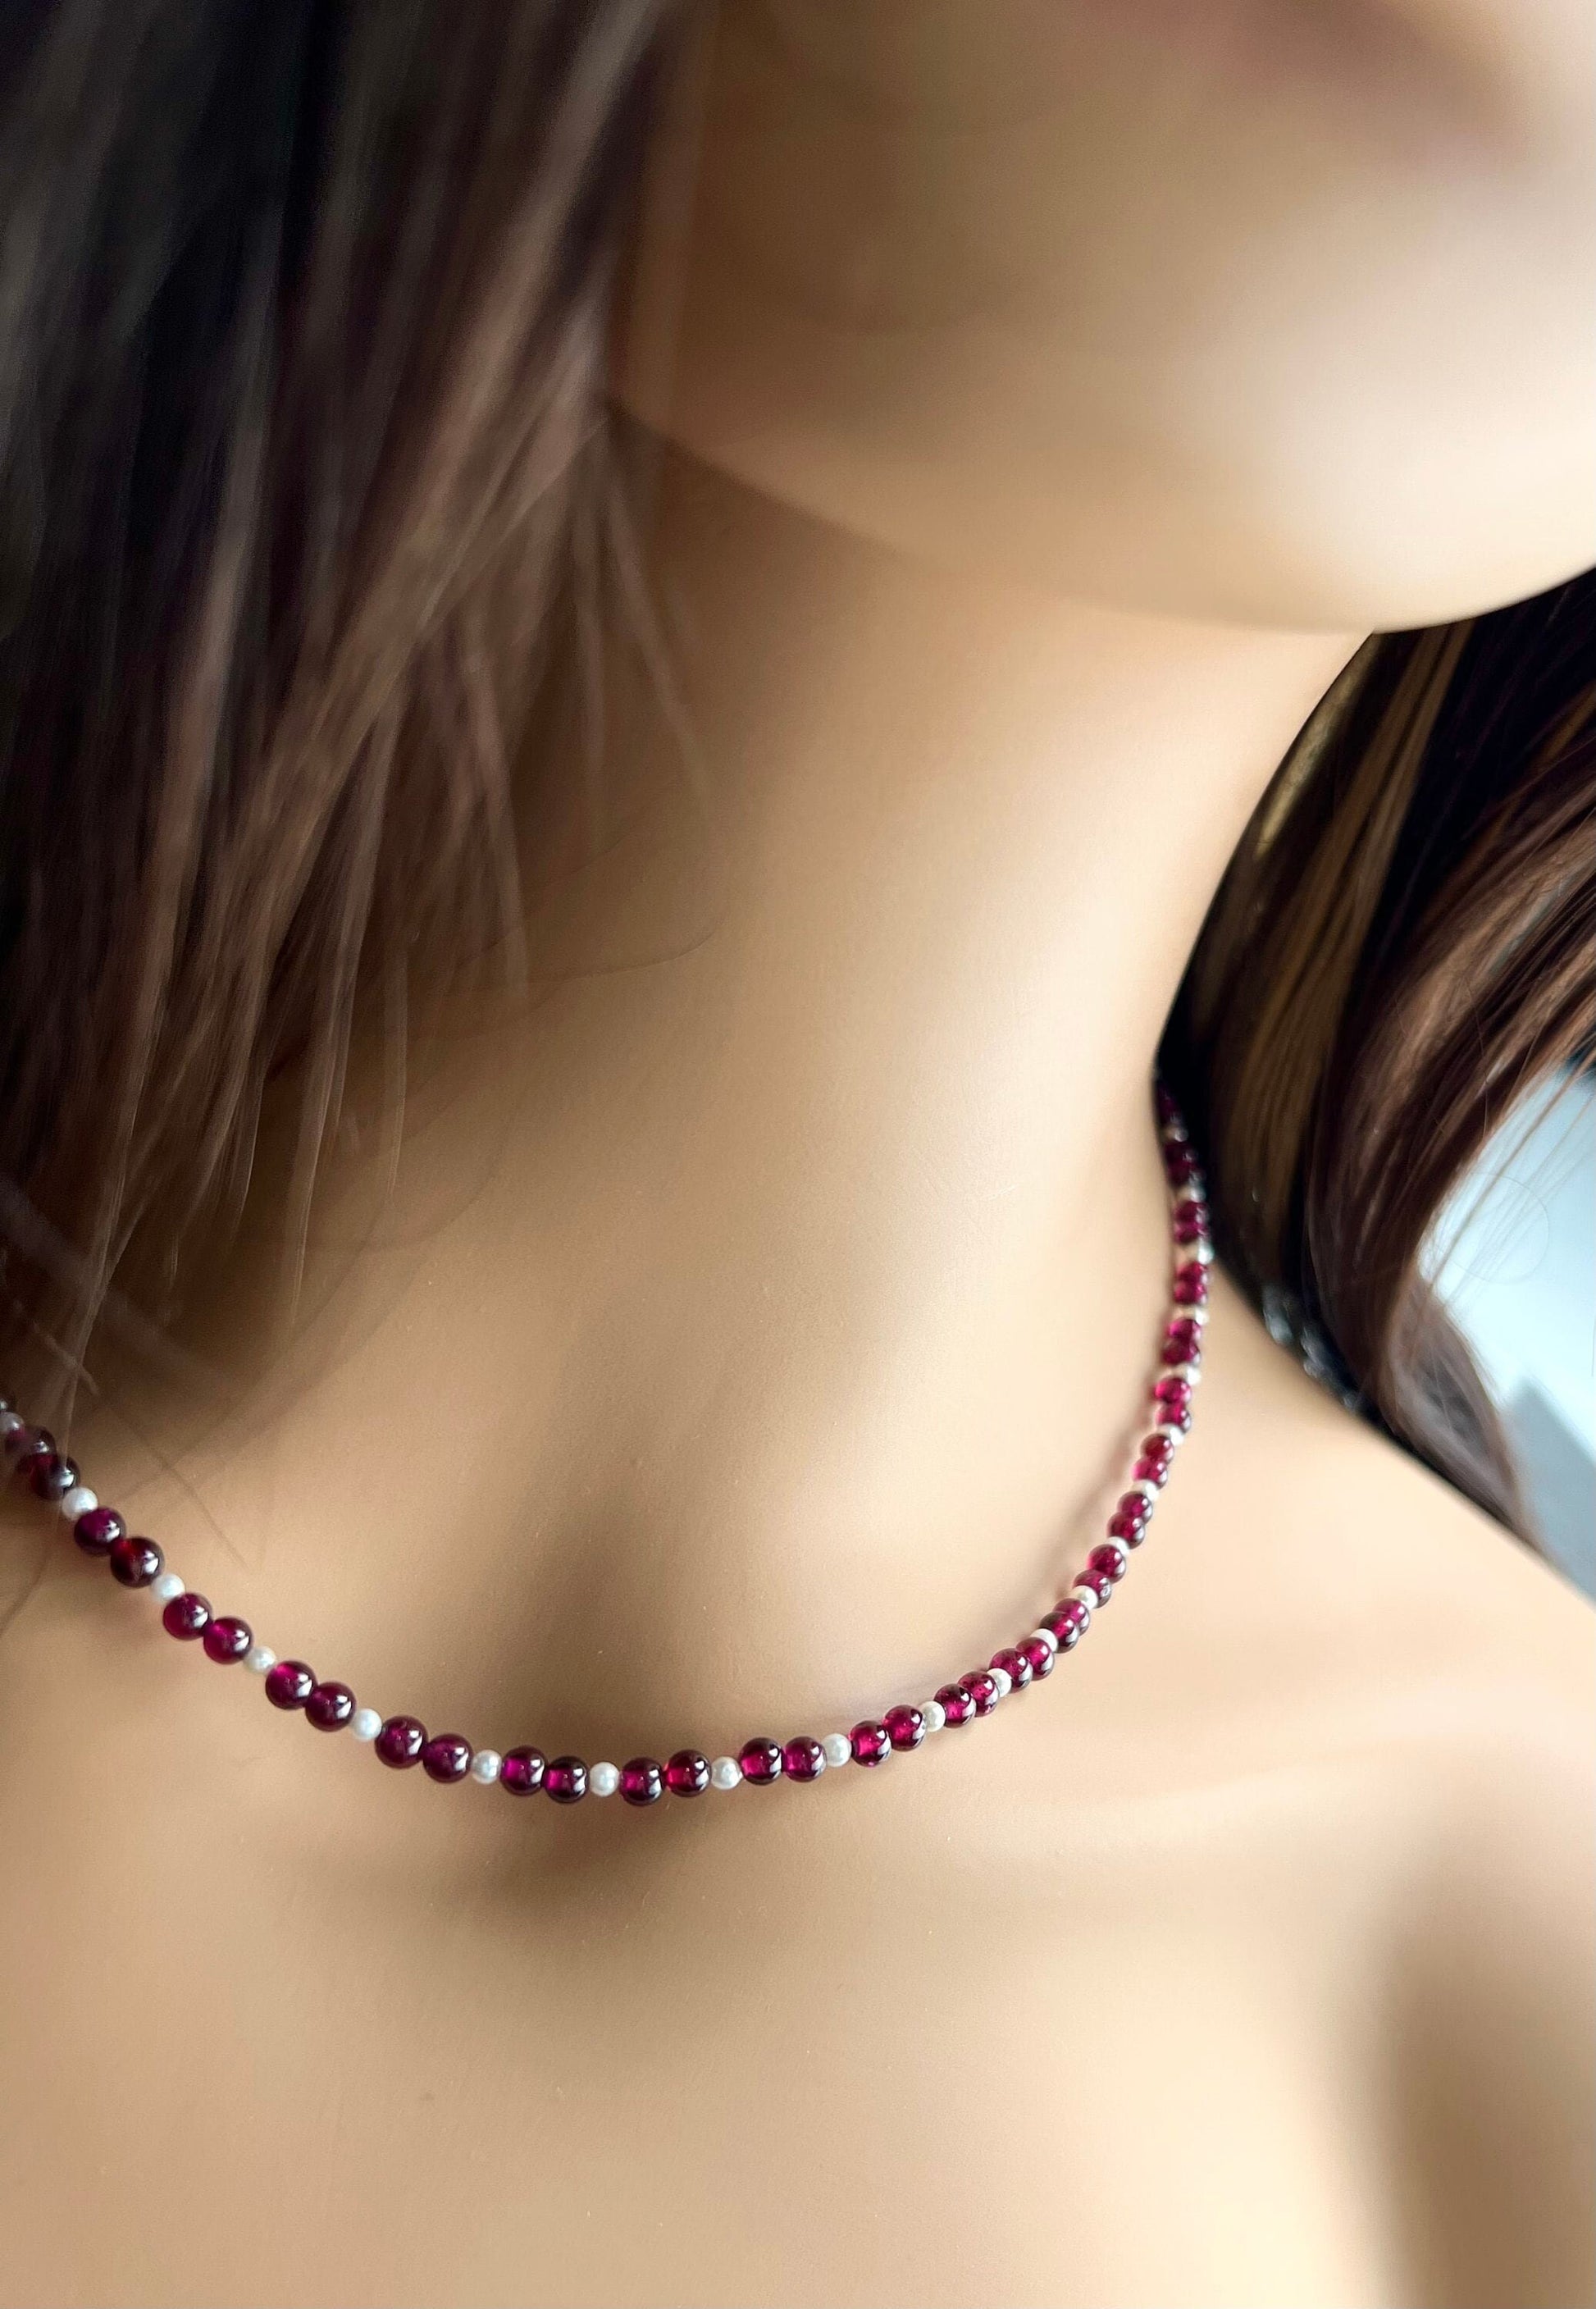 Merlot Red Garnet 3mm Round Choker Layering Necklace, Freshwater Pearl Round Spacer, 925 Sterling Silver, January Birthstone, Woman Gift